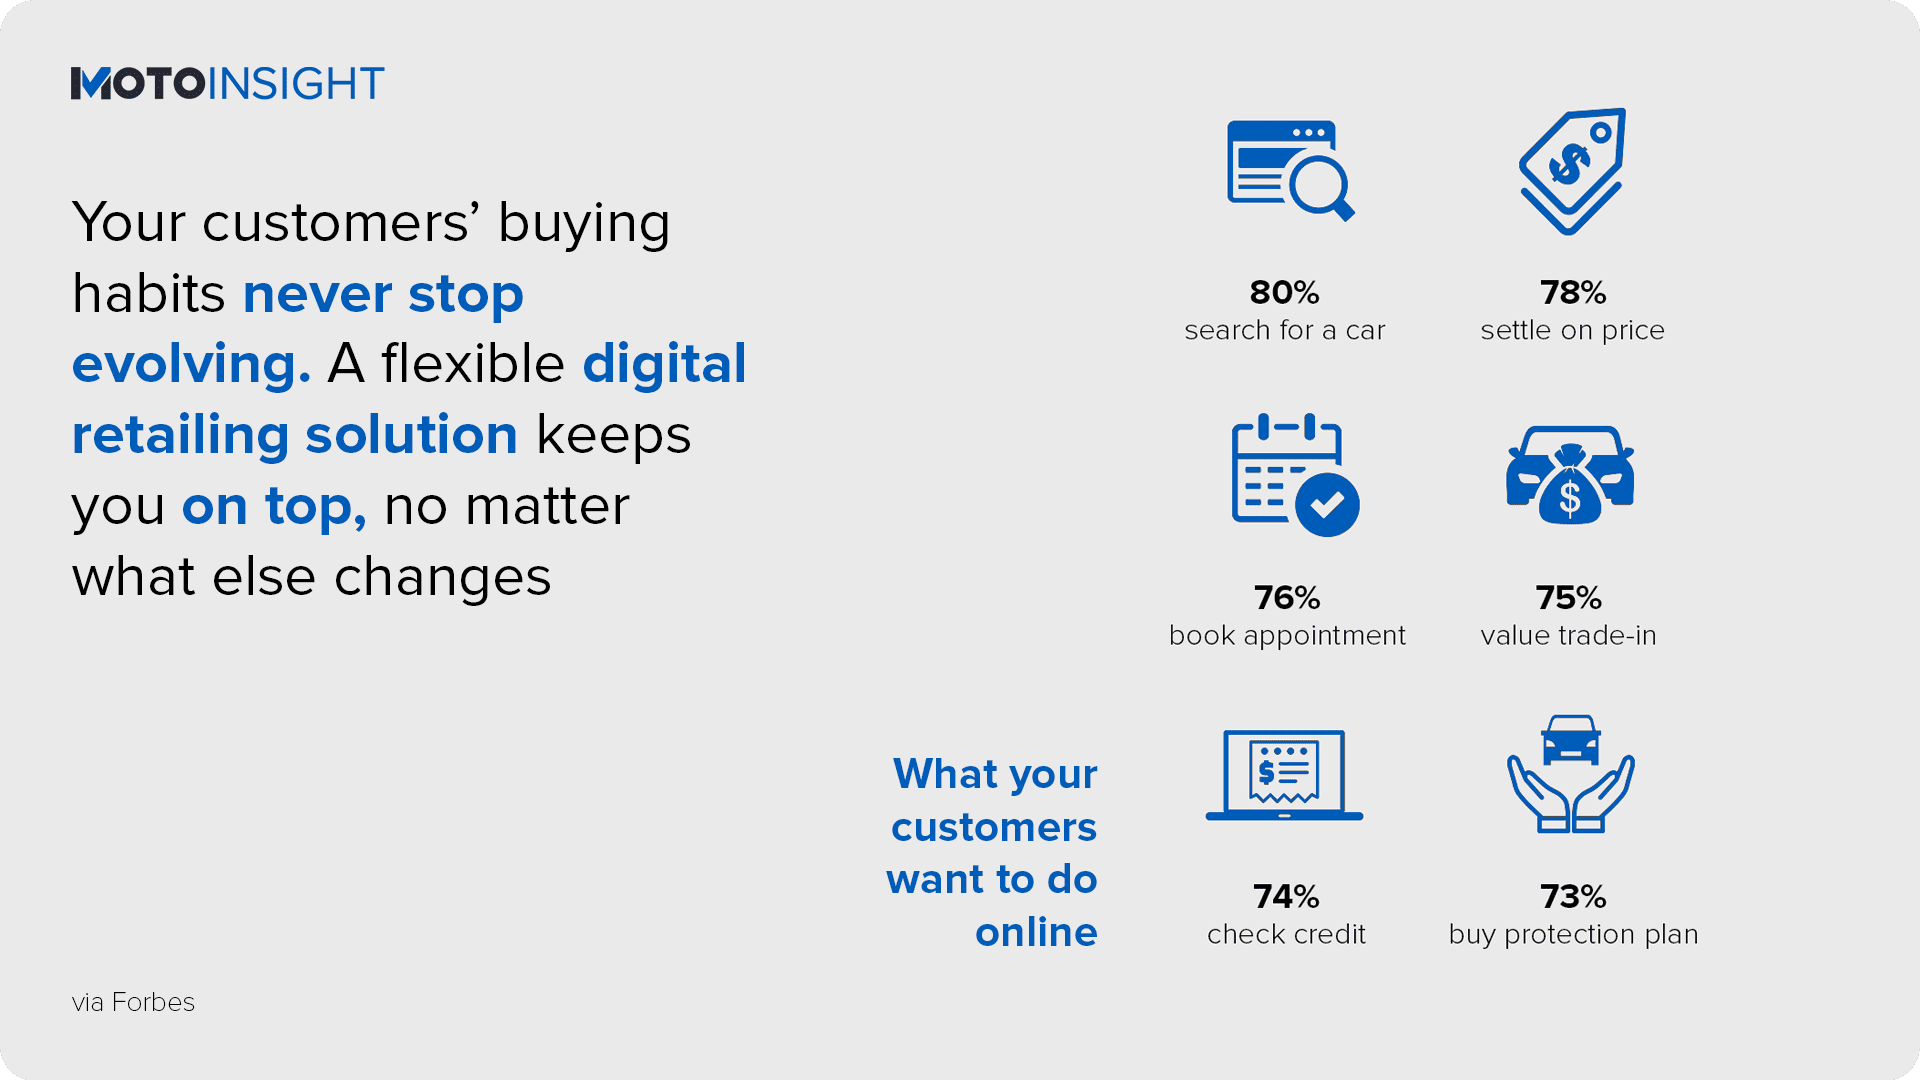 Your customers’ buying habits never stop evolving. A flexible digital retailing solution keeps you on top, no matter what else changes